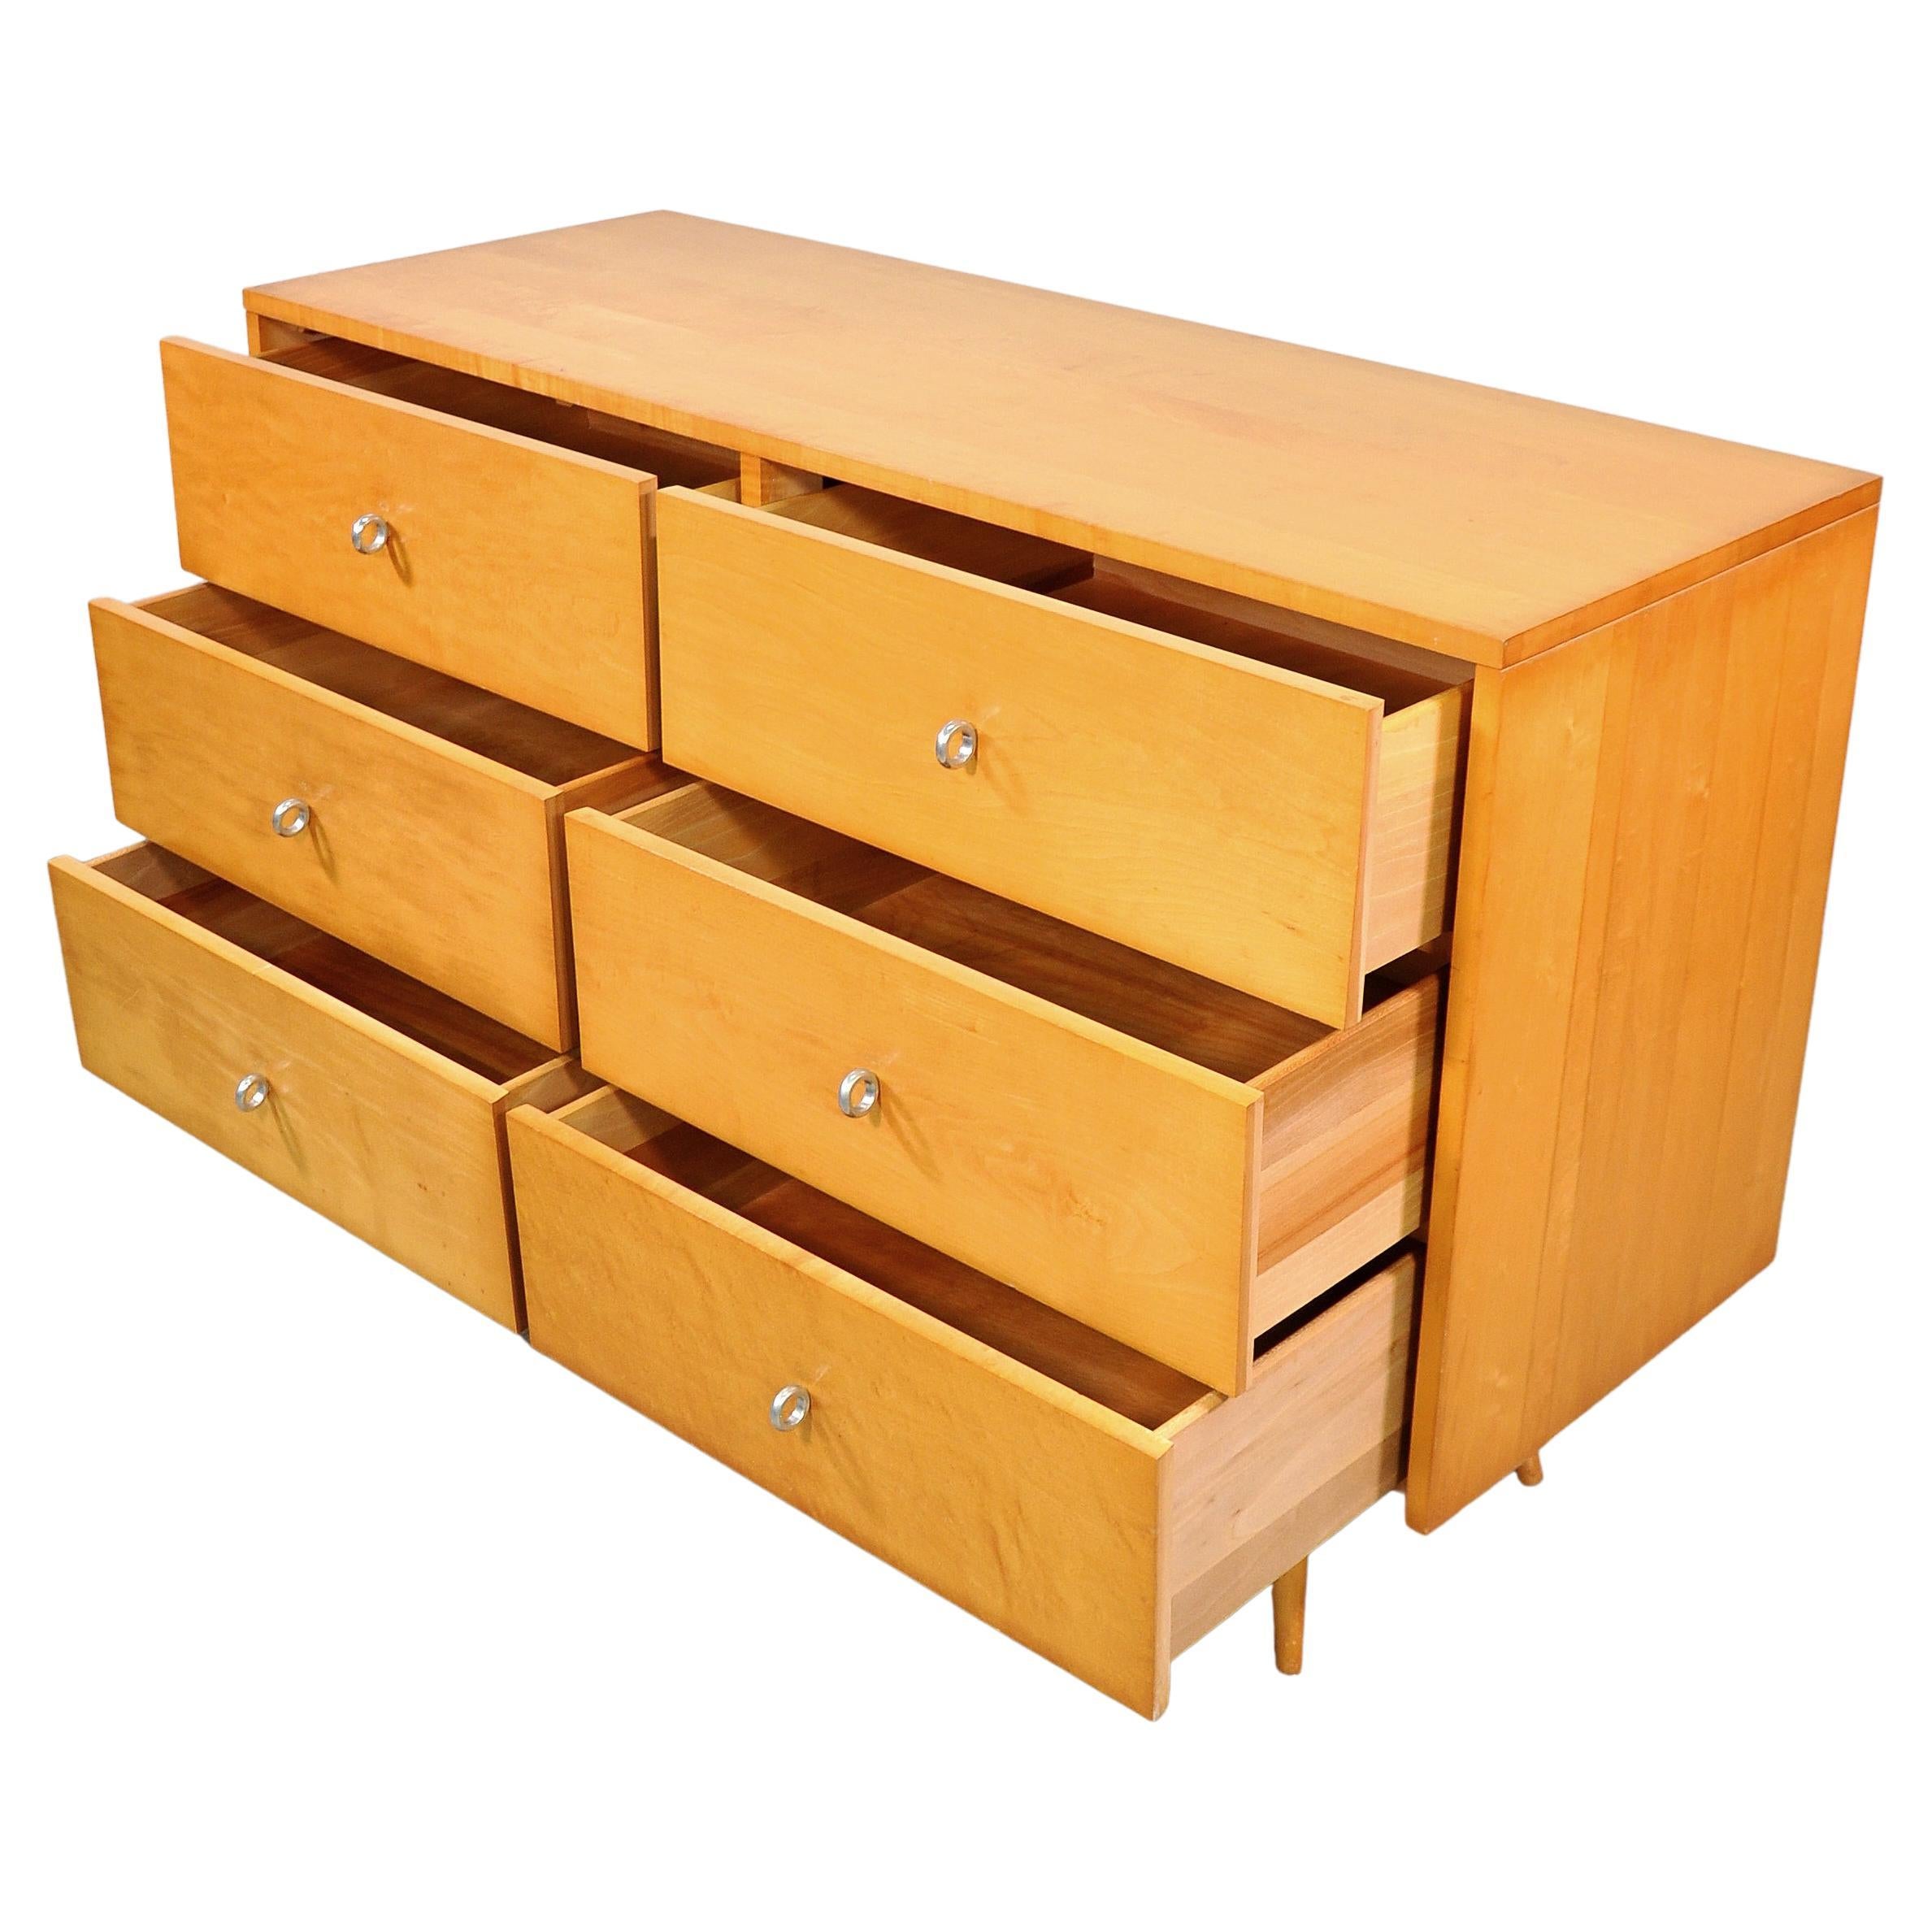 Paul McCobb Maple Double Dresser Planner Group by Winchendon Furniture, 1950s In Good Condition For Sale In Miami, FL